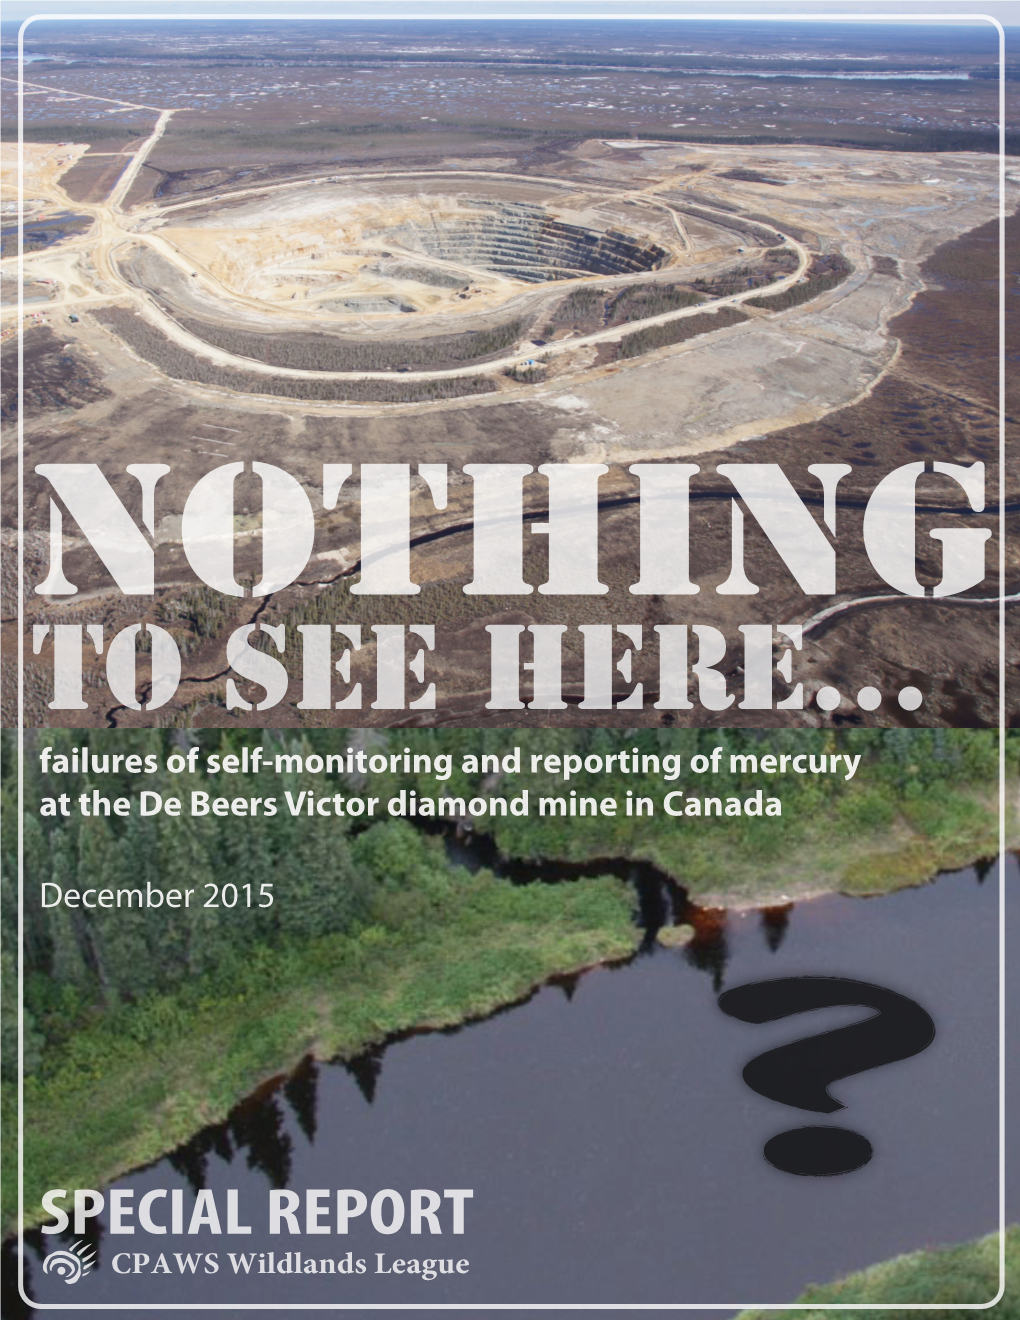 Failures of Self-Monitoring and Reporting at the De Beers Victor